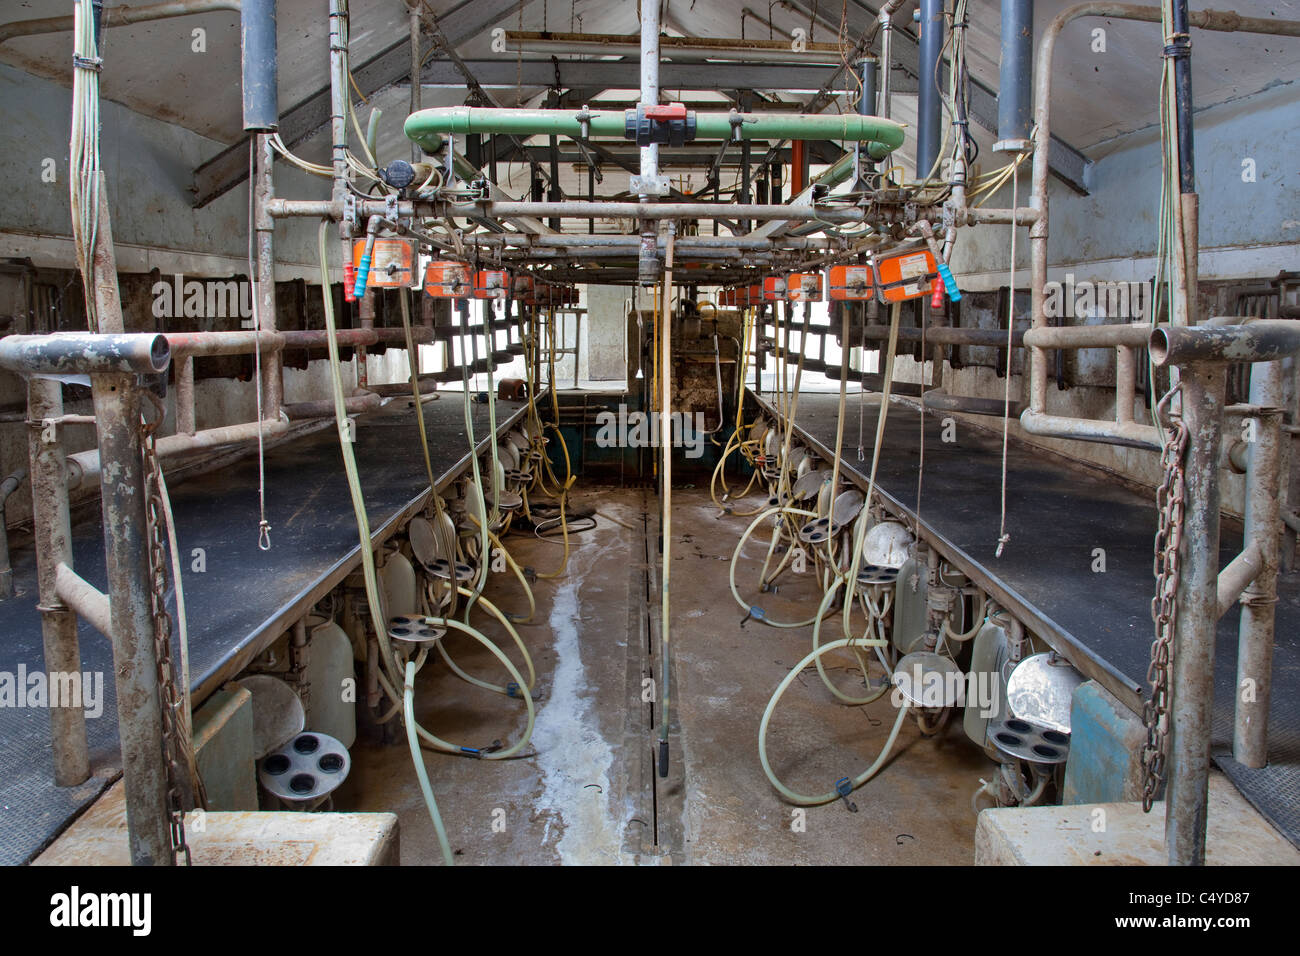 Empty closed milking parlor on dairy farm, Oxfordshire, England Stock Photo